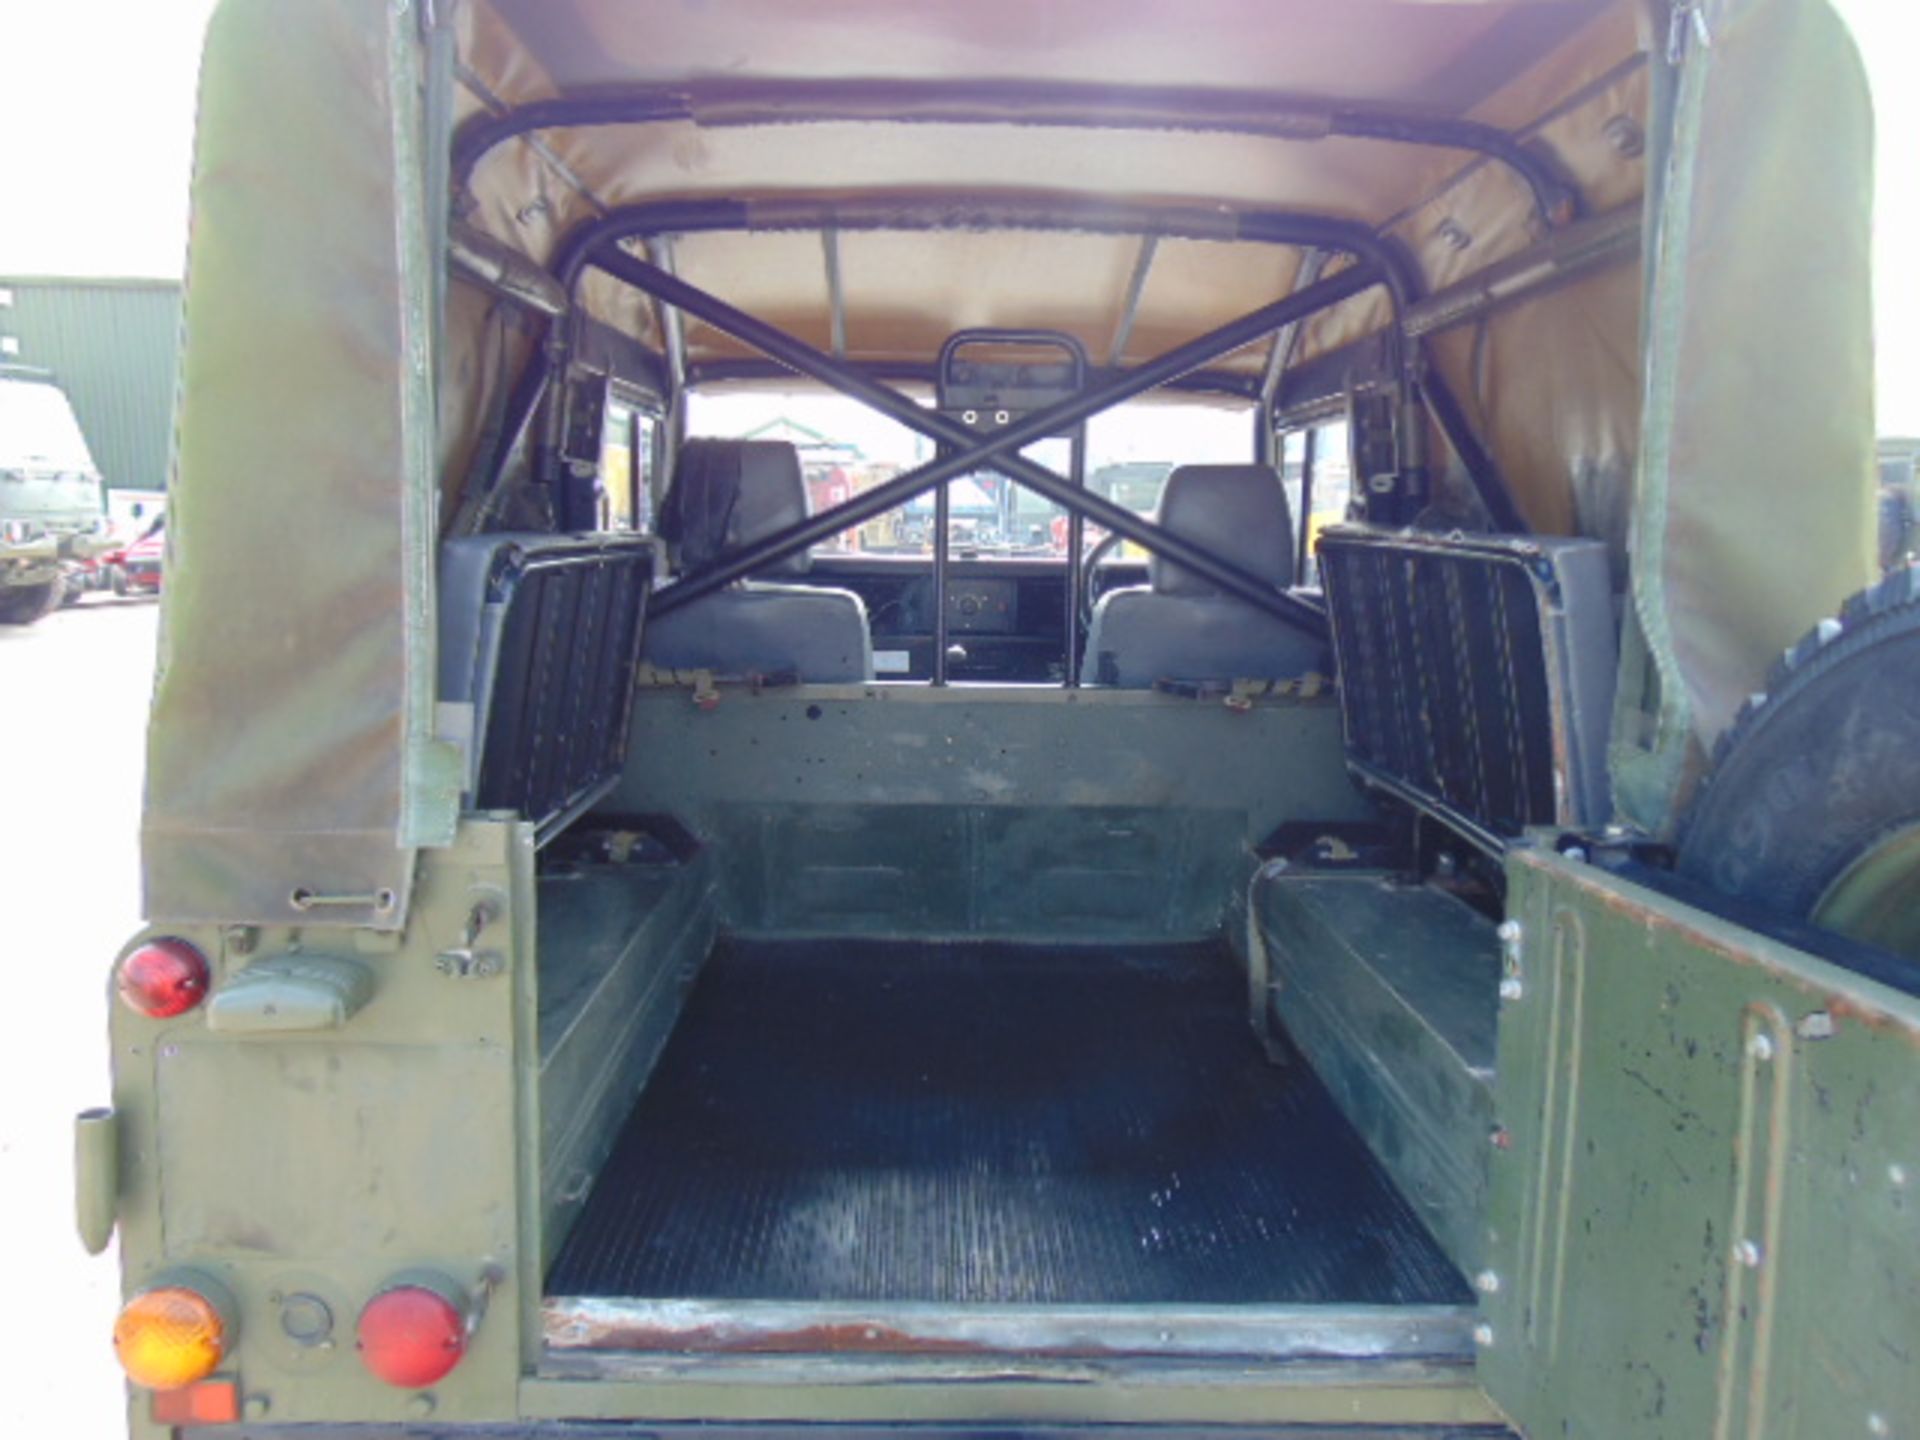 Military Specification Land Rover Wolf 90 Soft Top - Image 13 of 26